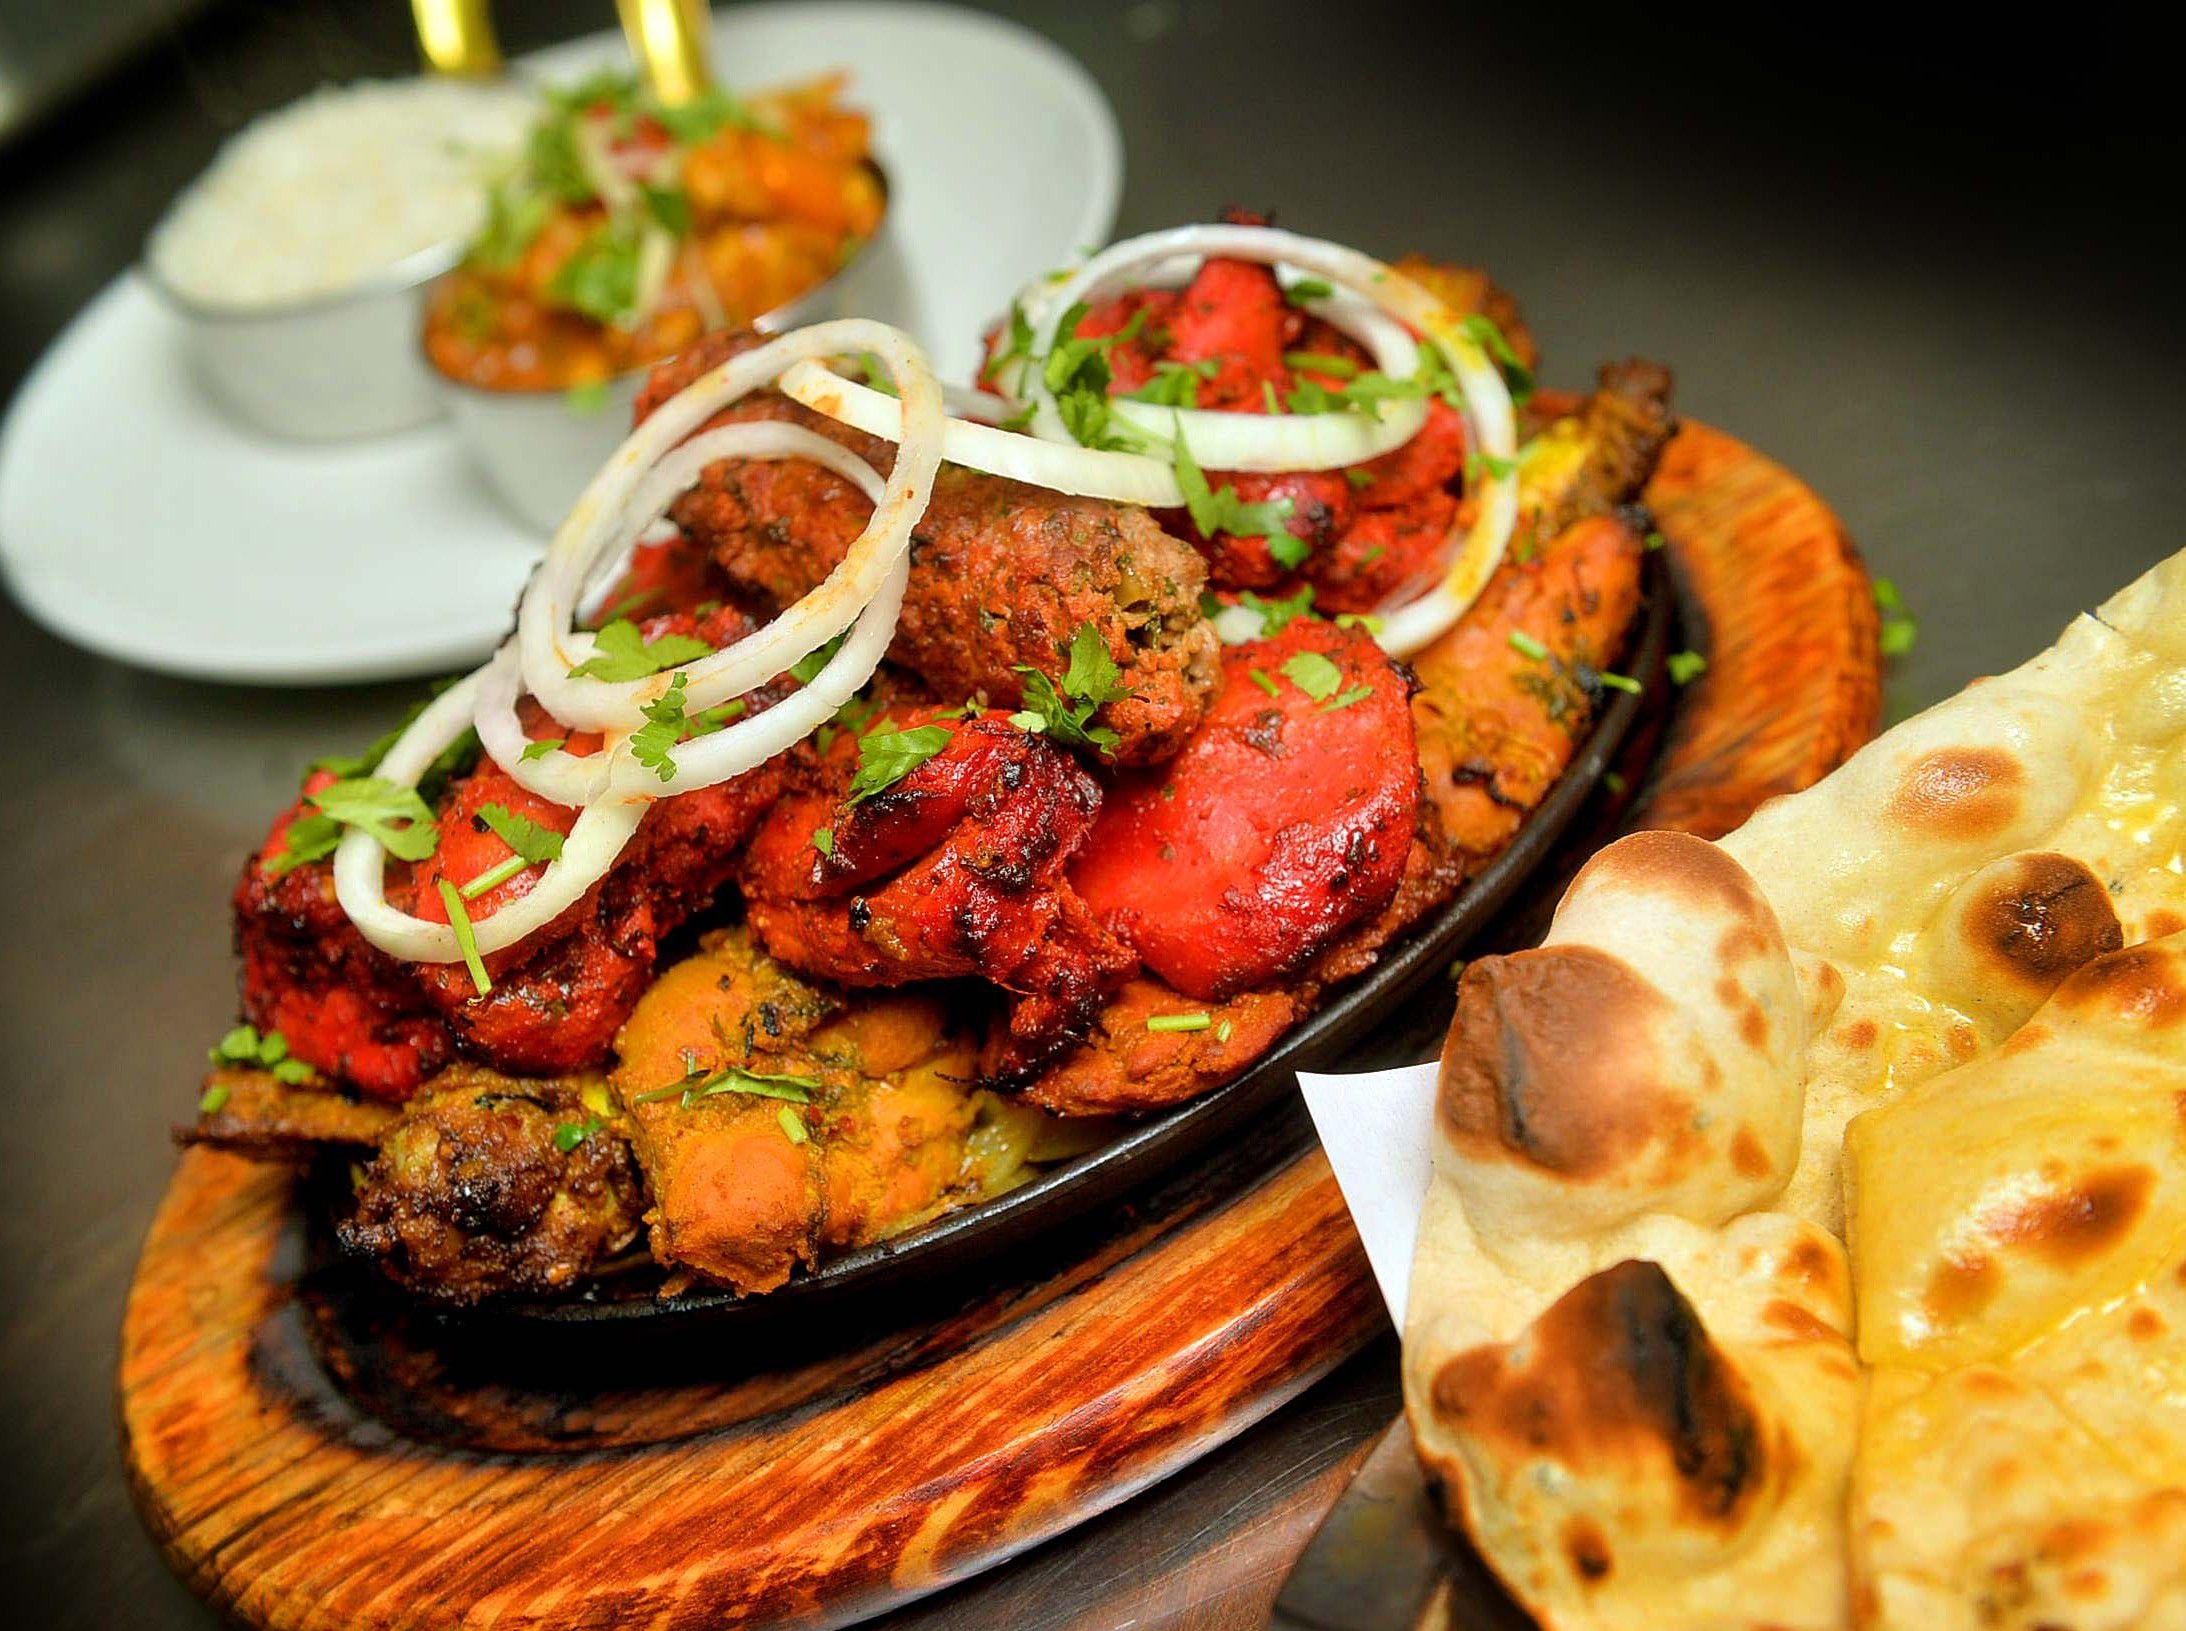 What makes a great desi pub? We explain what they are and what they have to offer